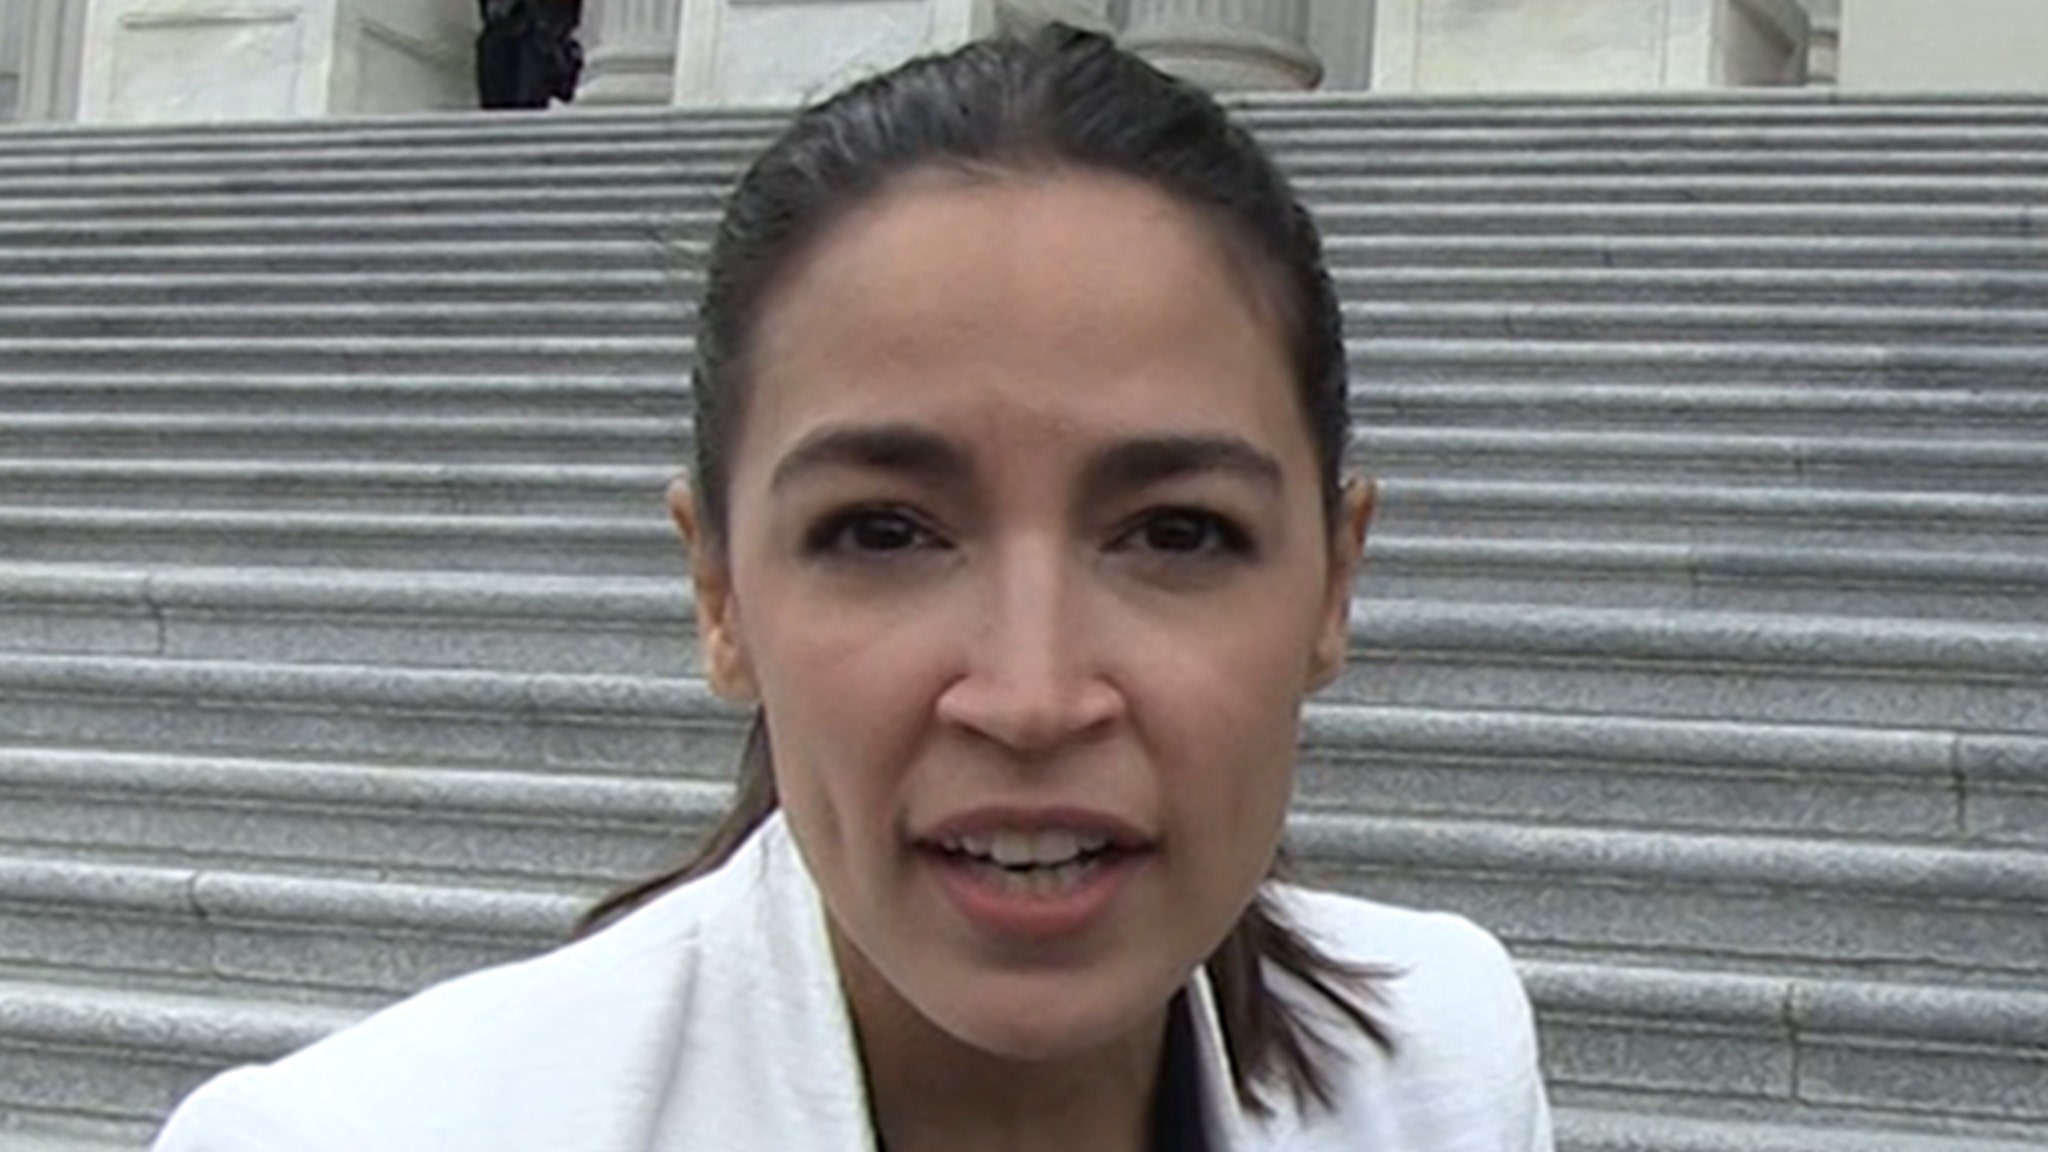 AOC faces House ethics probe for unspecified rules violation